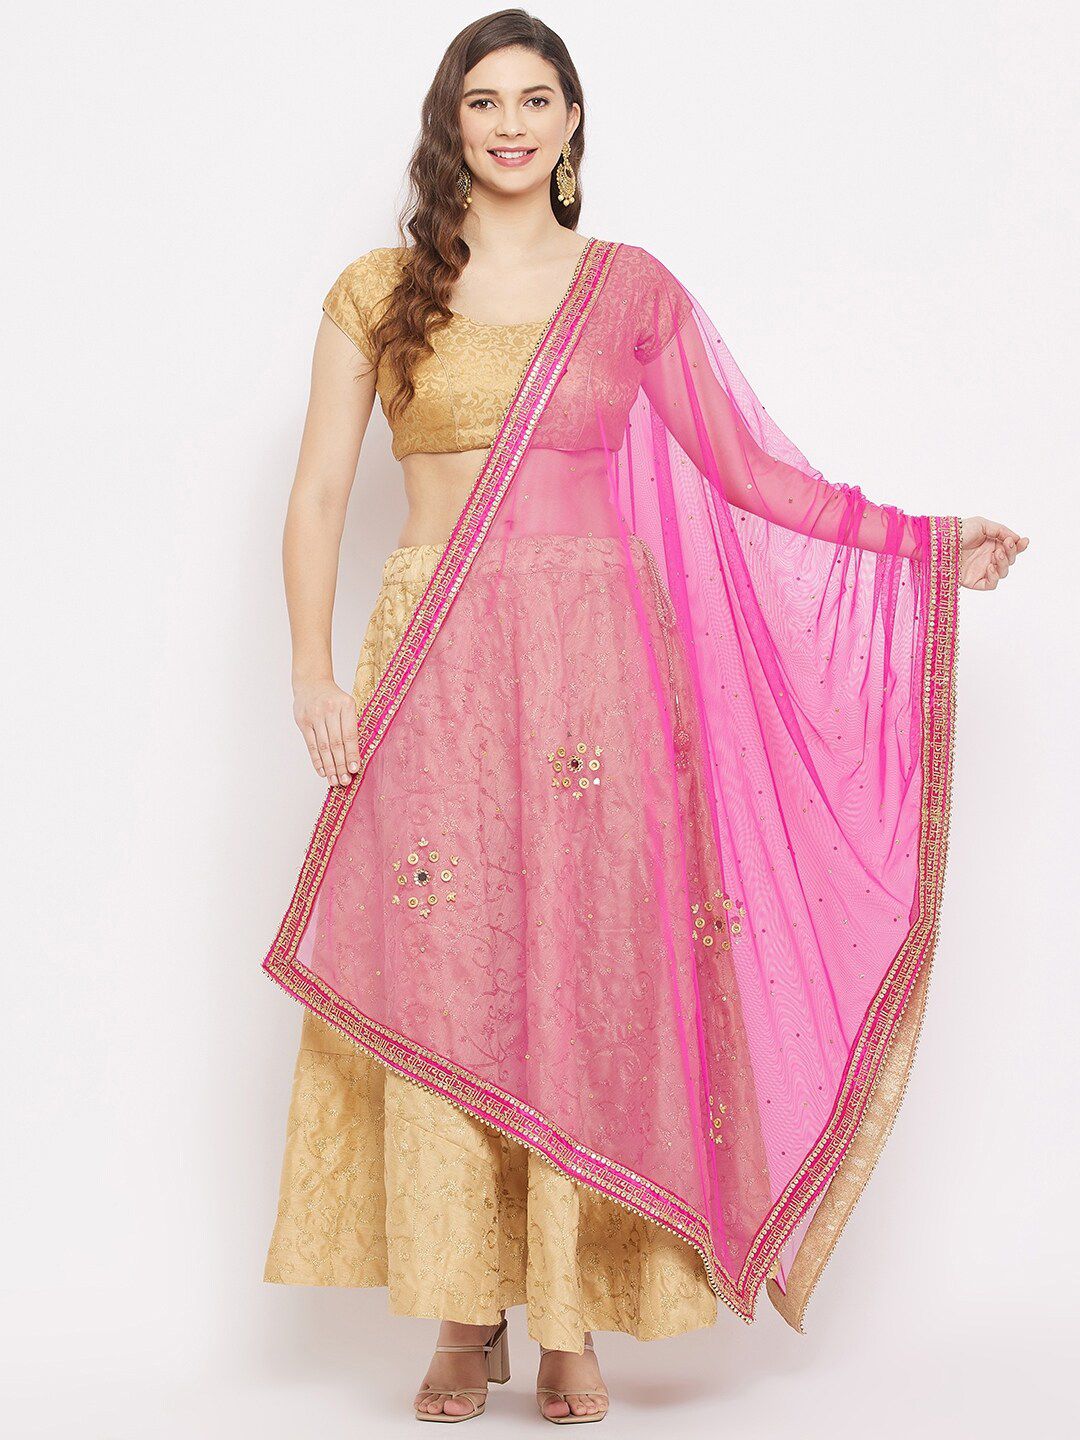 Clora Creation Magenta & Gold-Toned Embroidered Net Dupatta with Beads & Stones Price in India